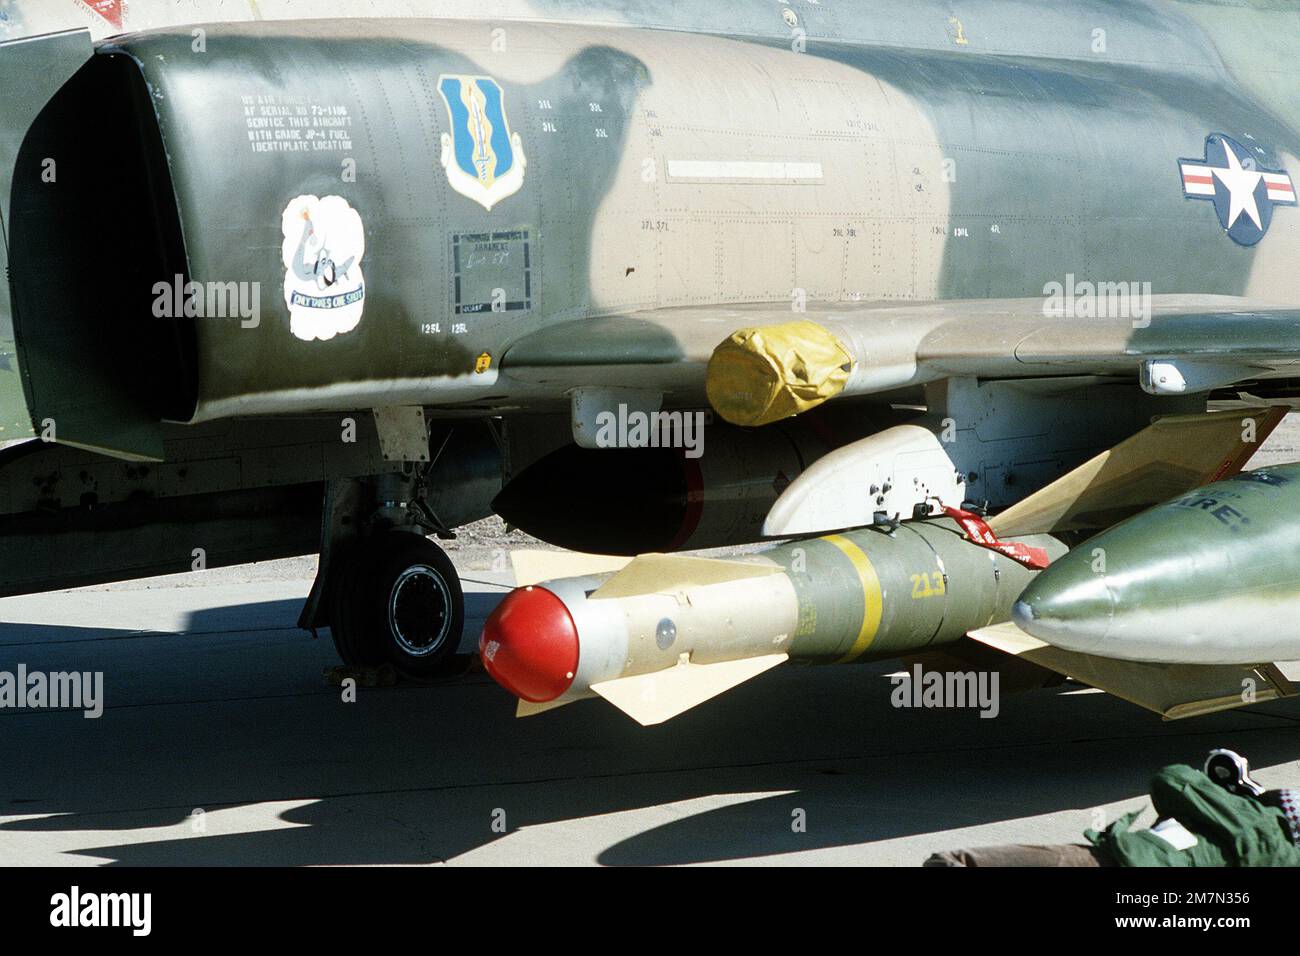 A GBU-15 glide bomb mounted on the wing pylon of an F-4 Phantom II aircraft at White Sands Missile Range. State: New Mexico (NM) Country: United States Of America (USA) Stock Photo